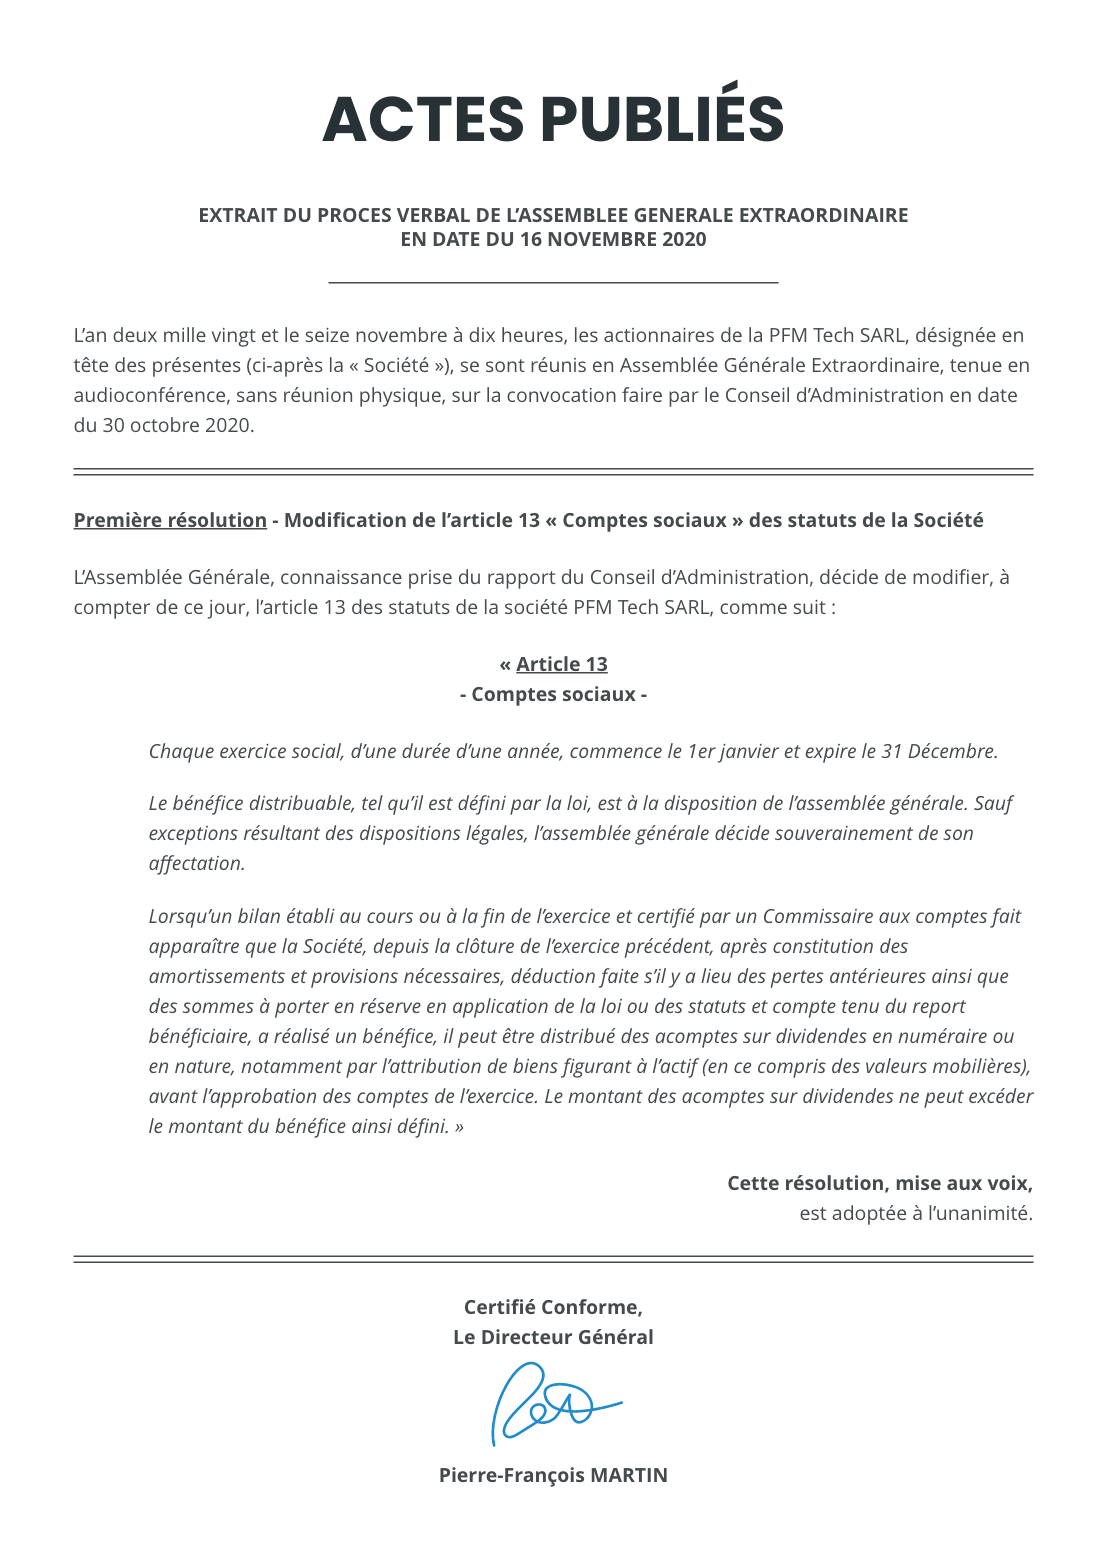 /build//img/services/document-actes.png